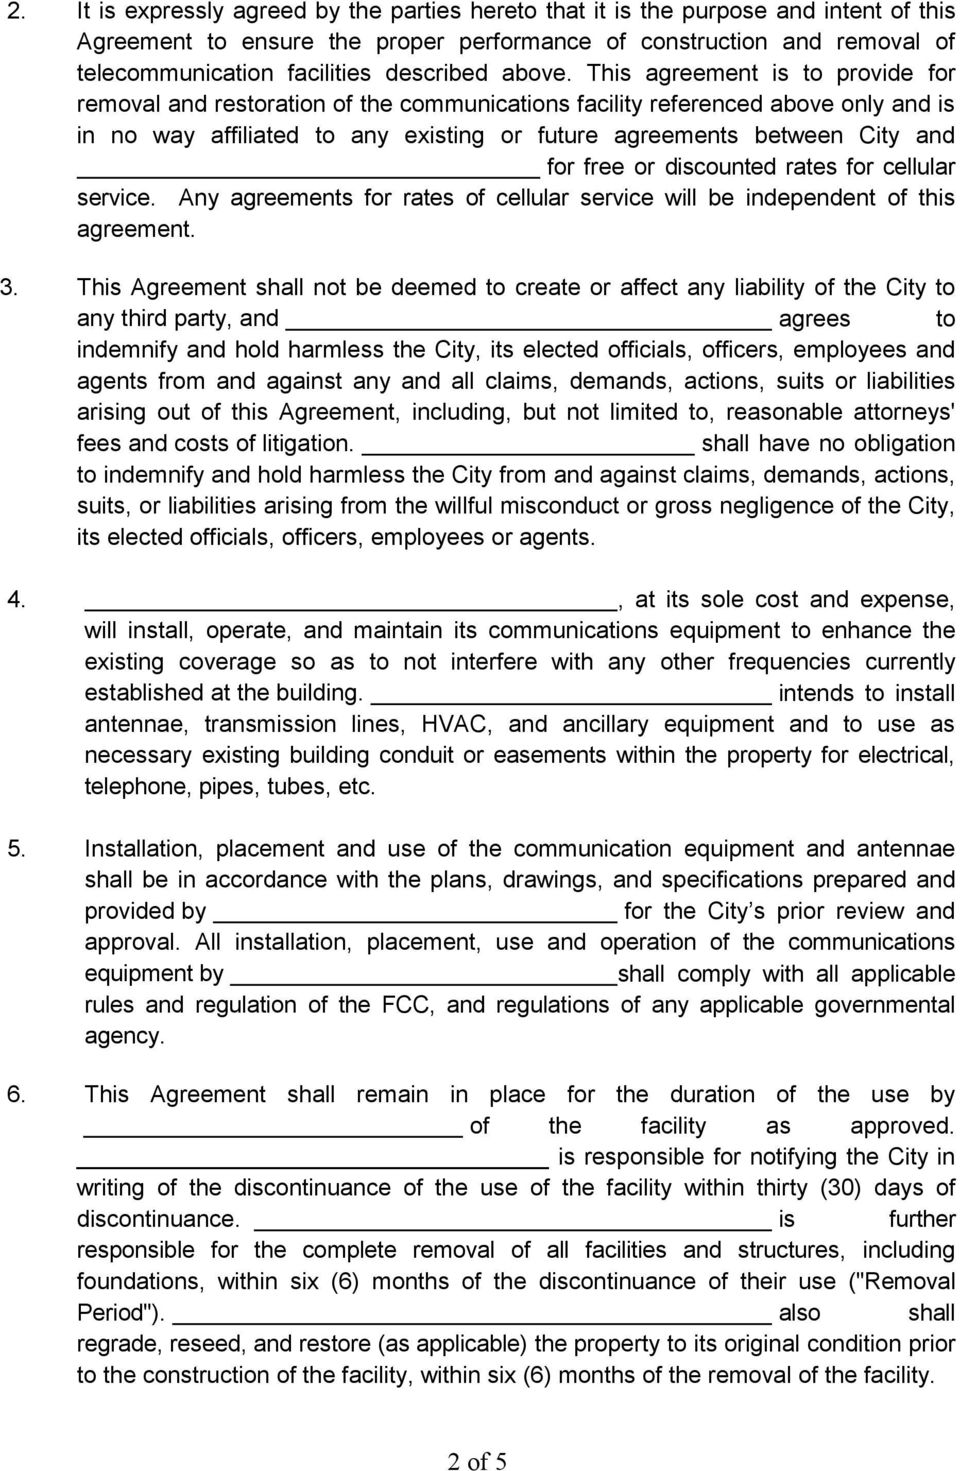 This agreement is to provide for removal and restoration of the communications facility referenced above only and is in no way affiliated to any existing or future agreements between City and for